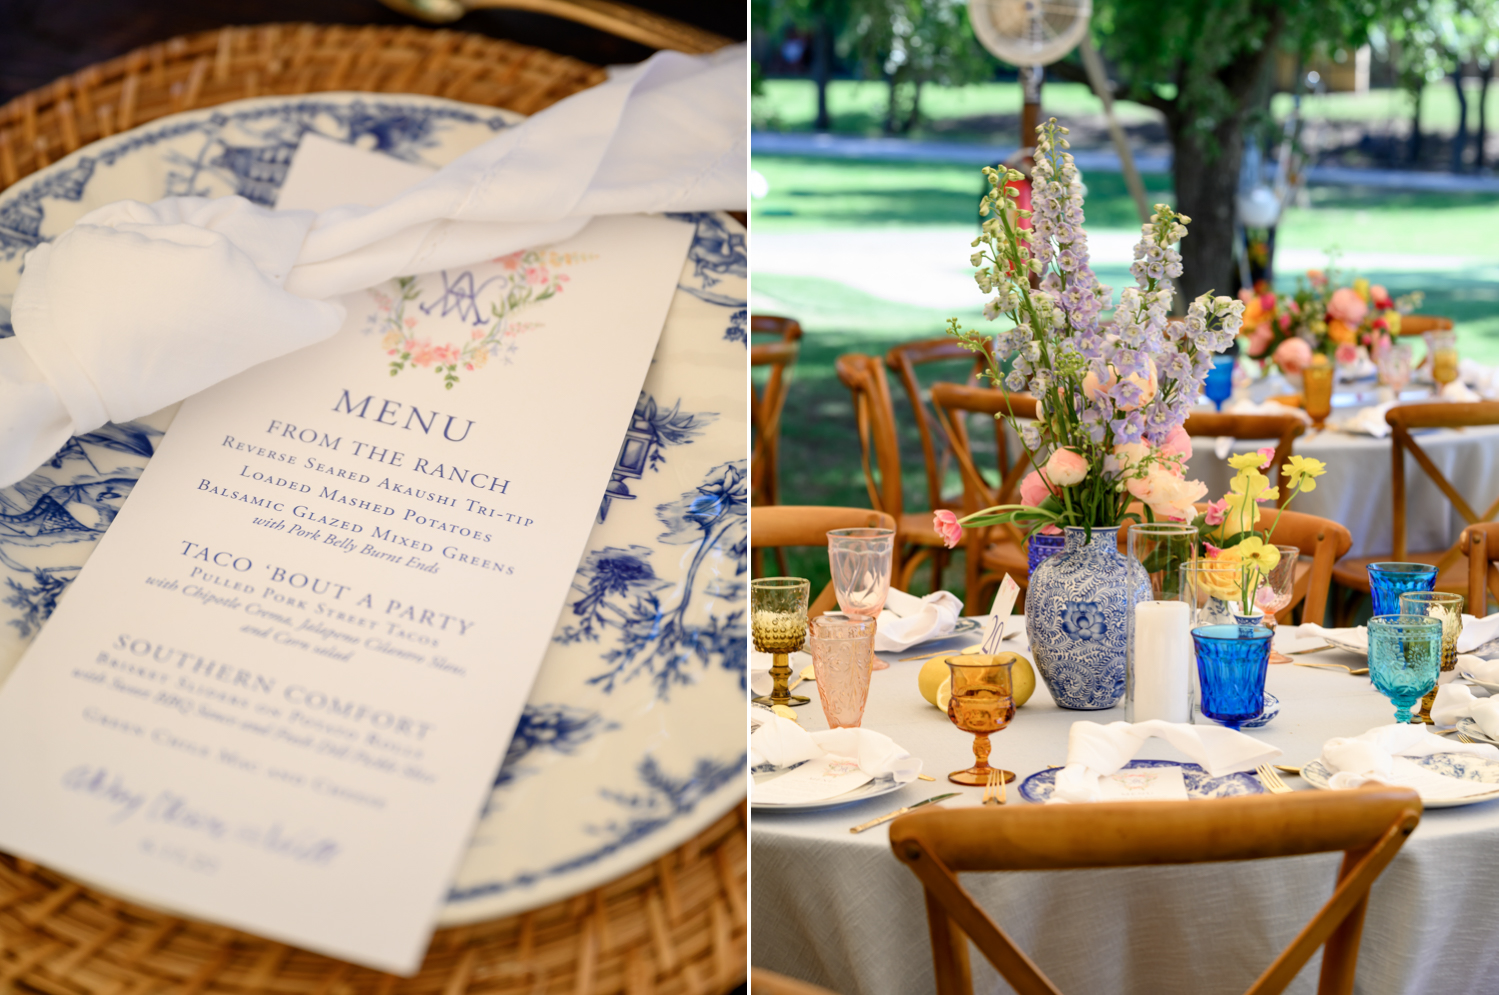 dinner menu on blue china plate and table setting with floral centerpiece 